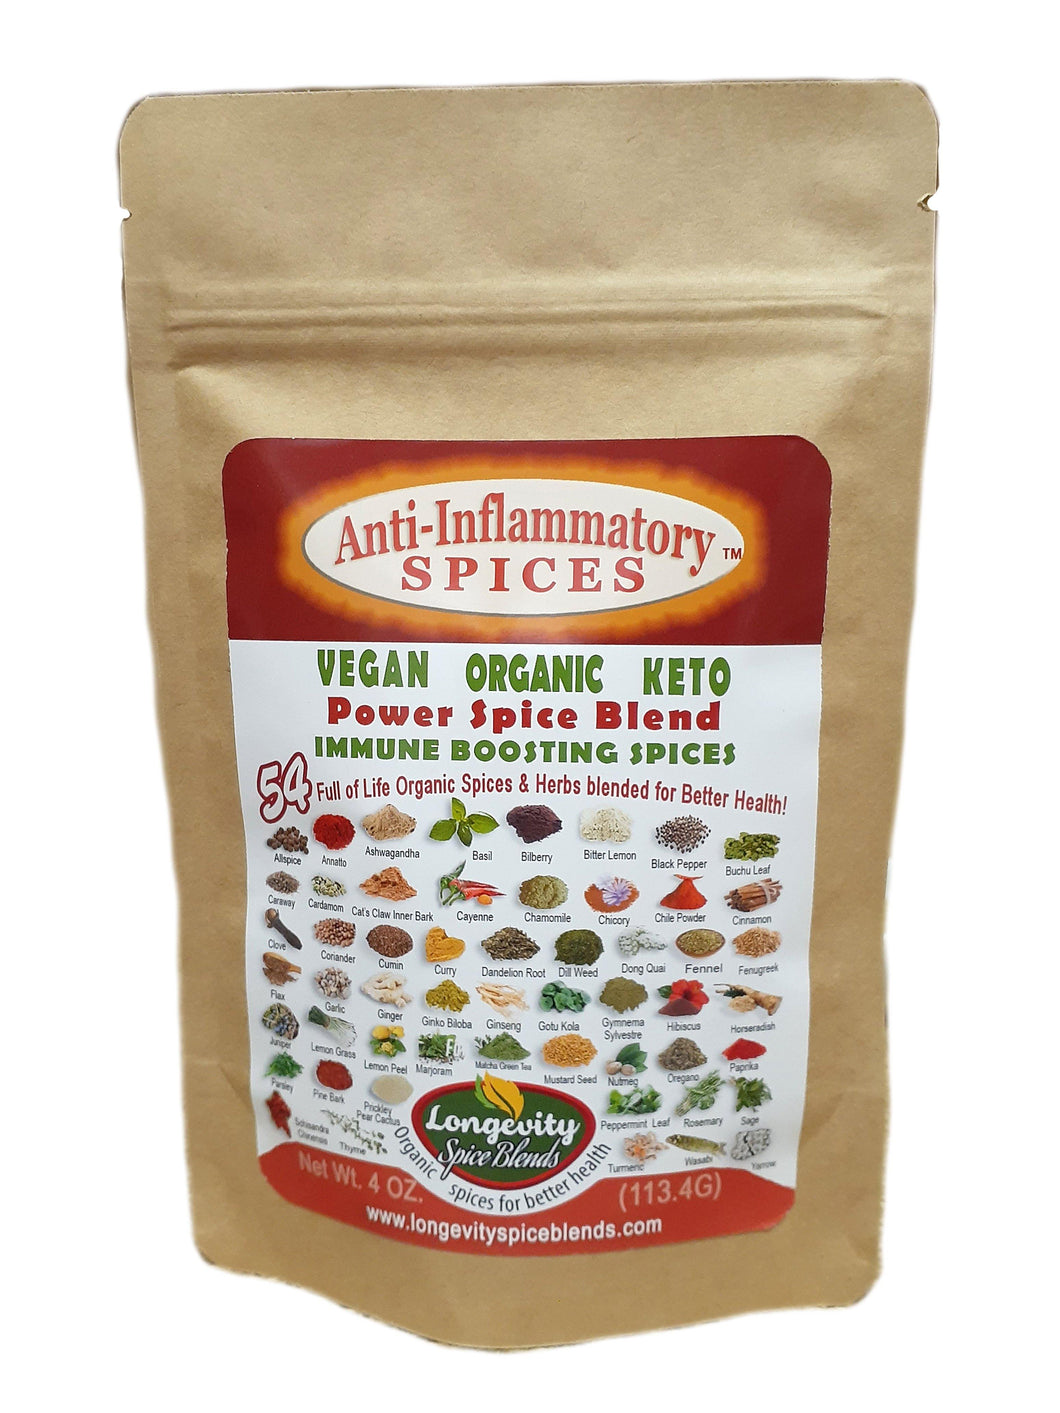 Anti-Inflammatory Spices- 54 Organic Spices blended specifically with benefits for Inflammation (4 oz. pouch - 64 tsp. servings) - Longevity Spice Blends